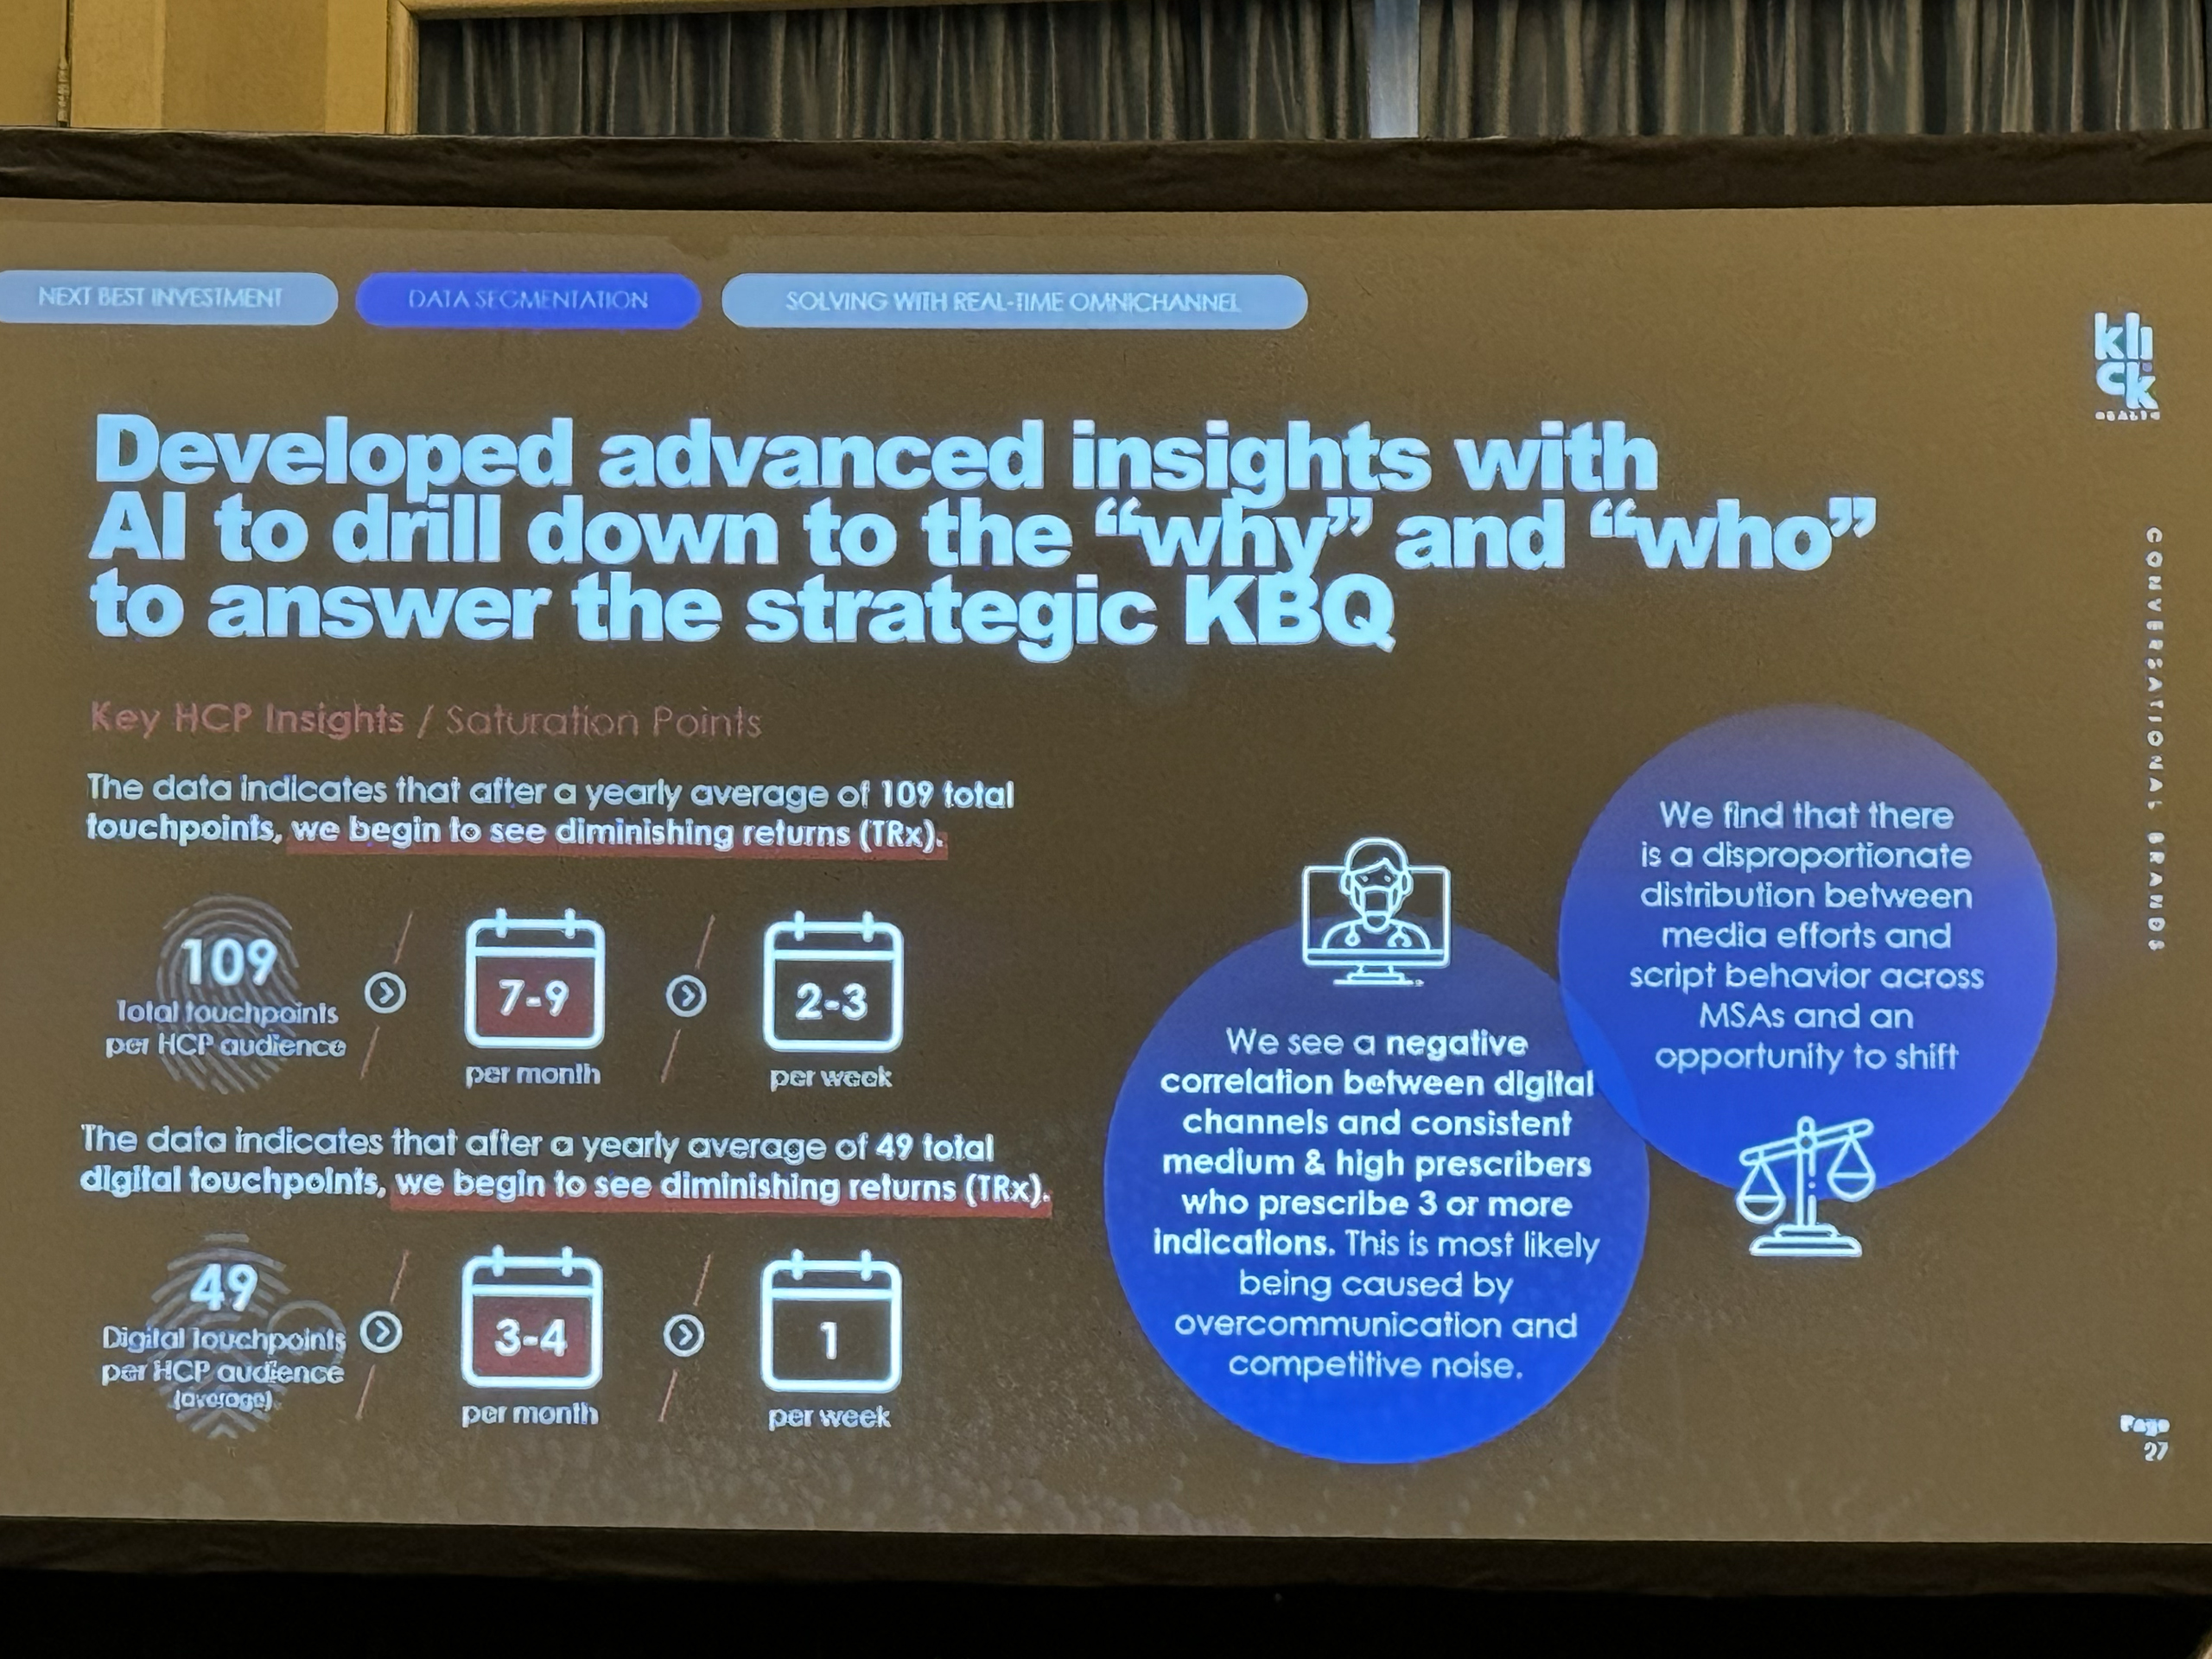 A presentation slide: Developed advanced insights with Al to drill down to the 